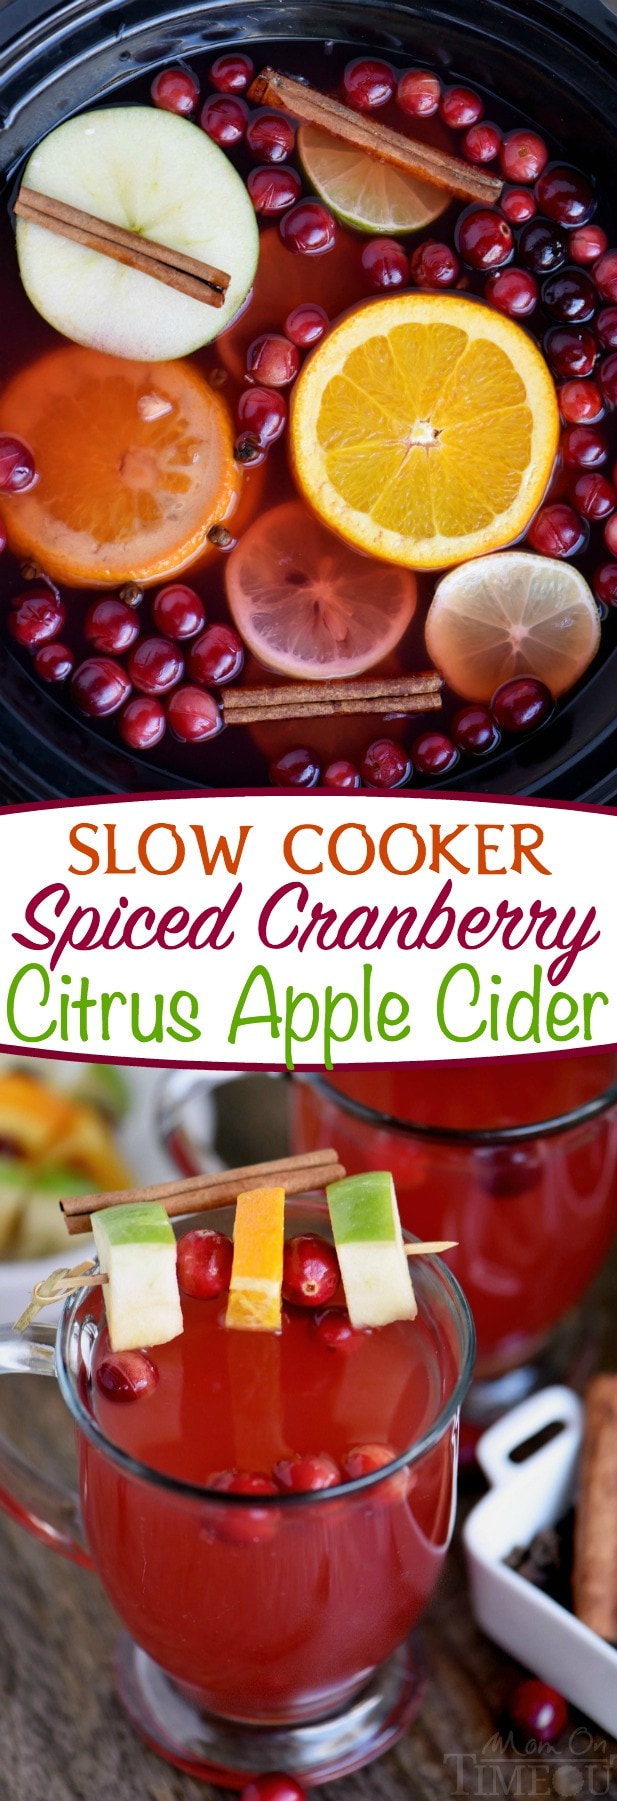 Slow Cooker Spiced Cranberry Citrus Apple Cider - Mom On Timeout